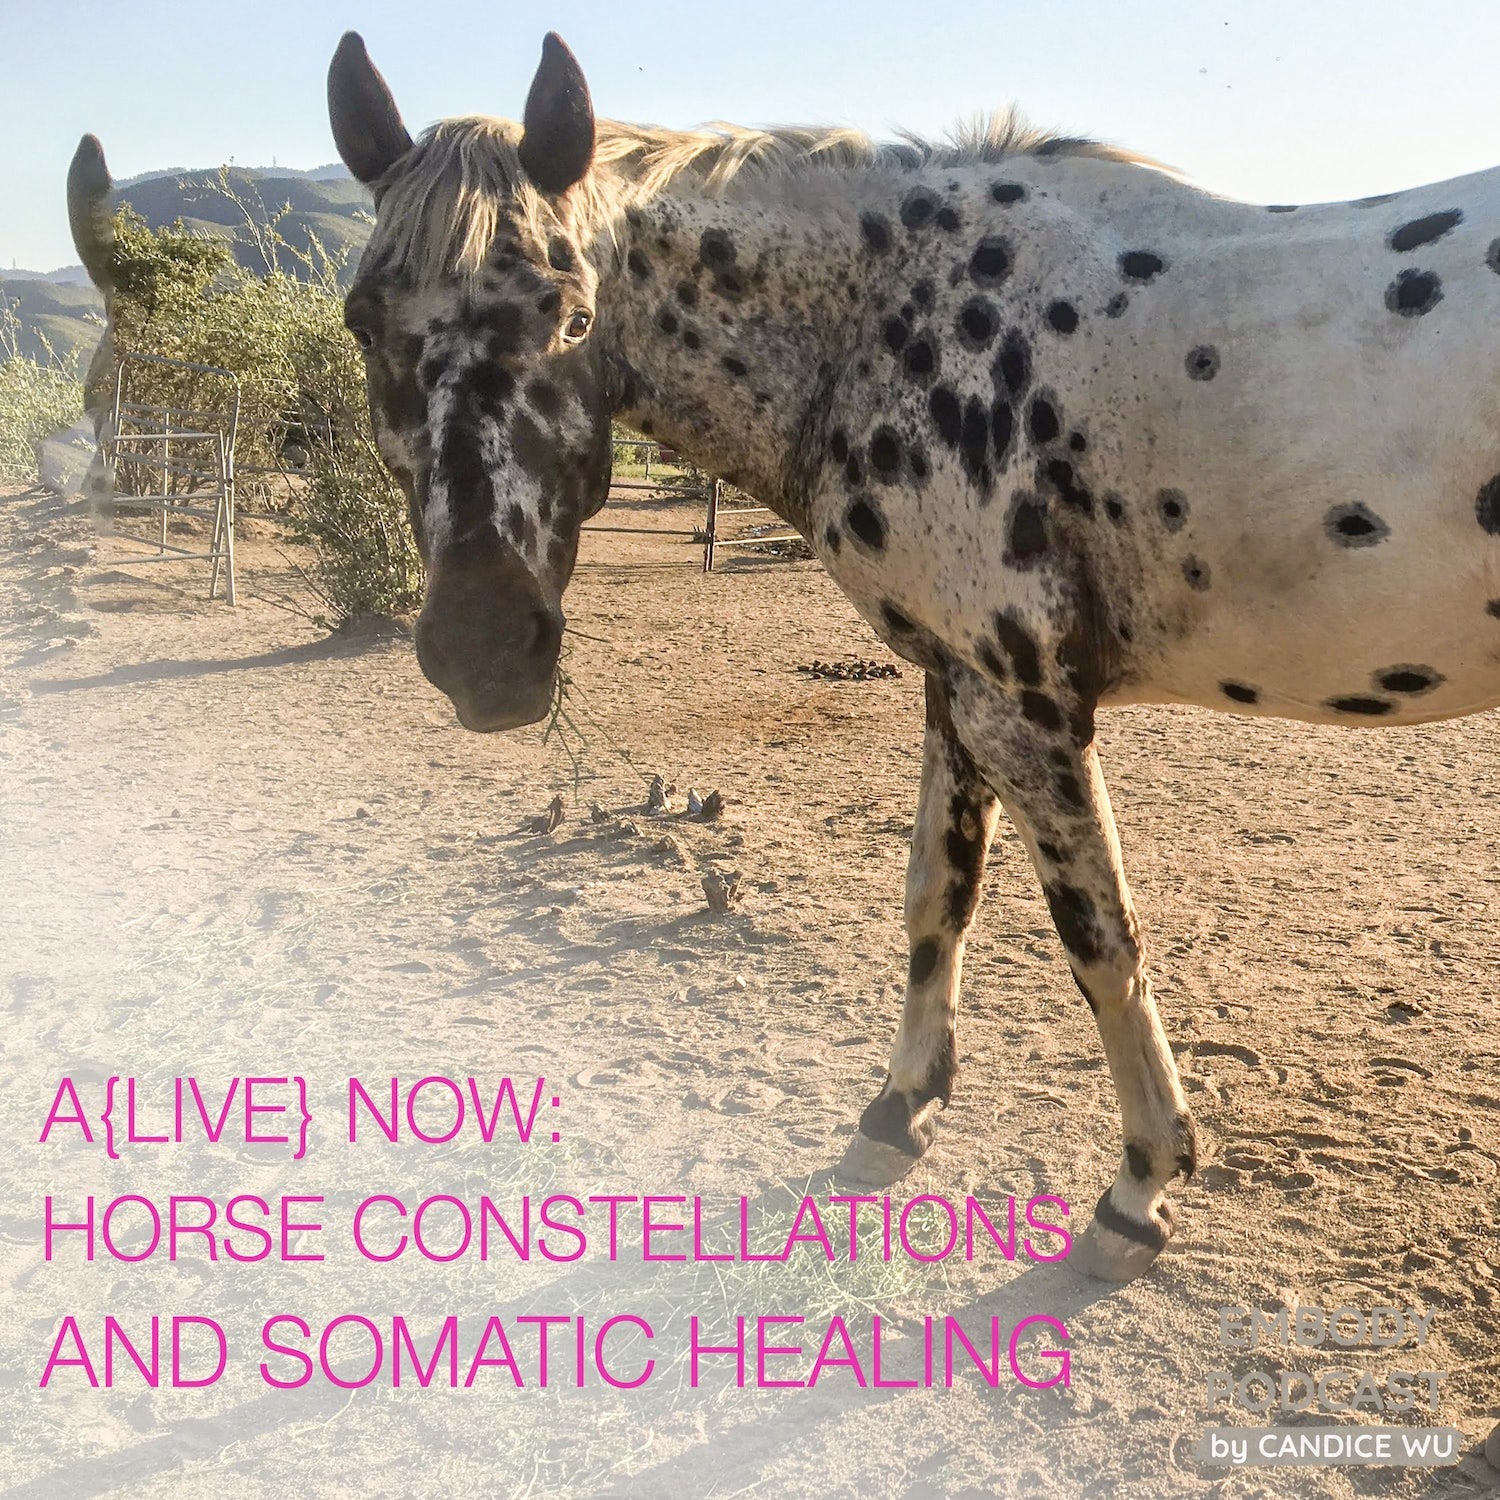 78: A{Live} Now: Horse Constellations & Somatic Healing